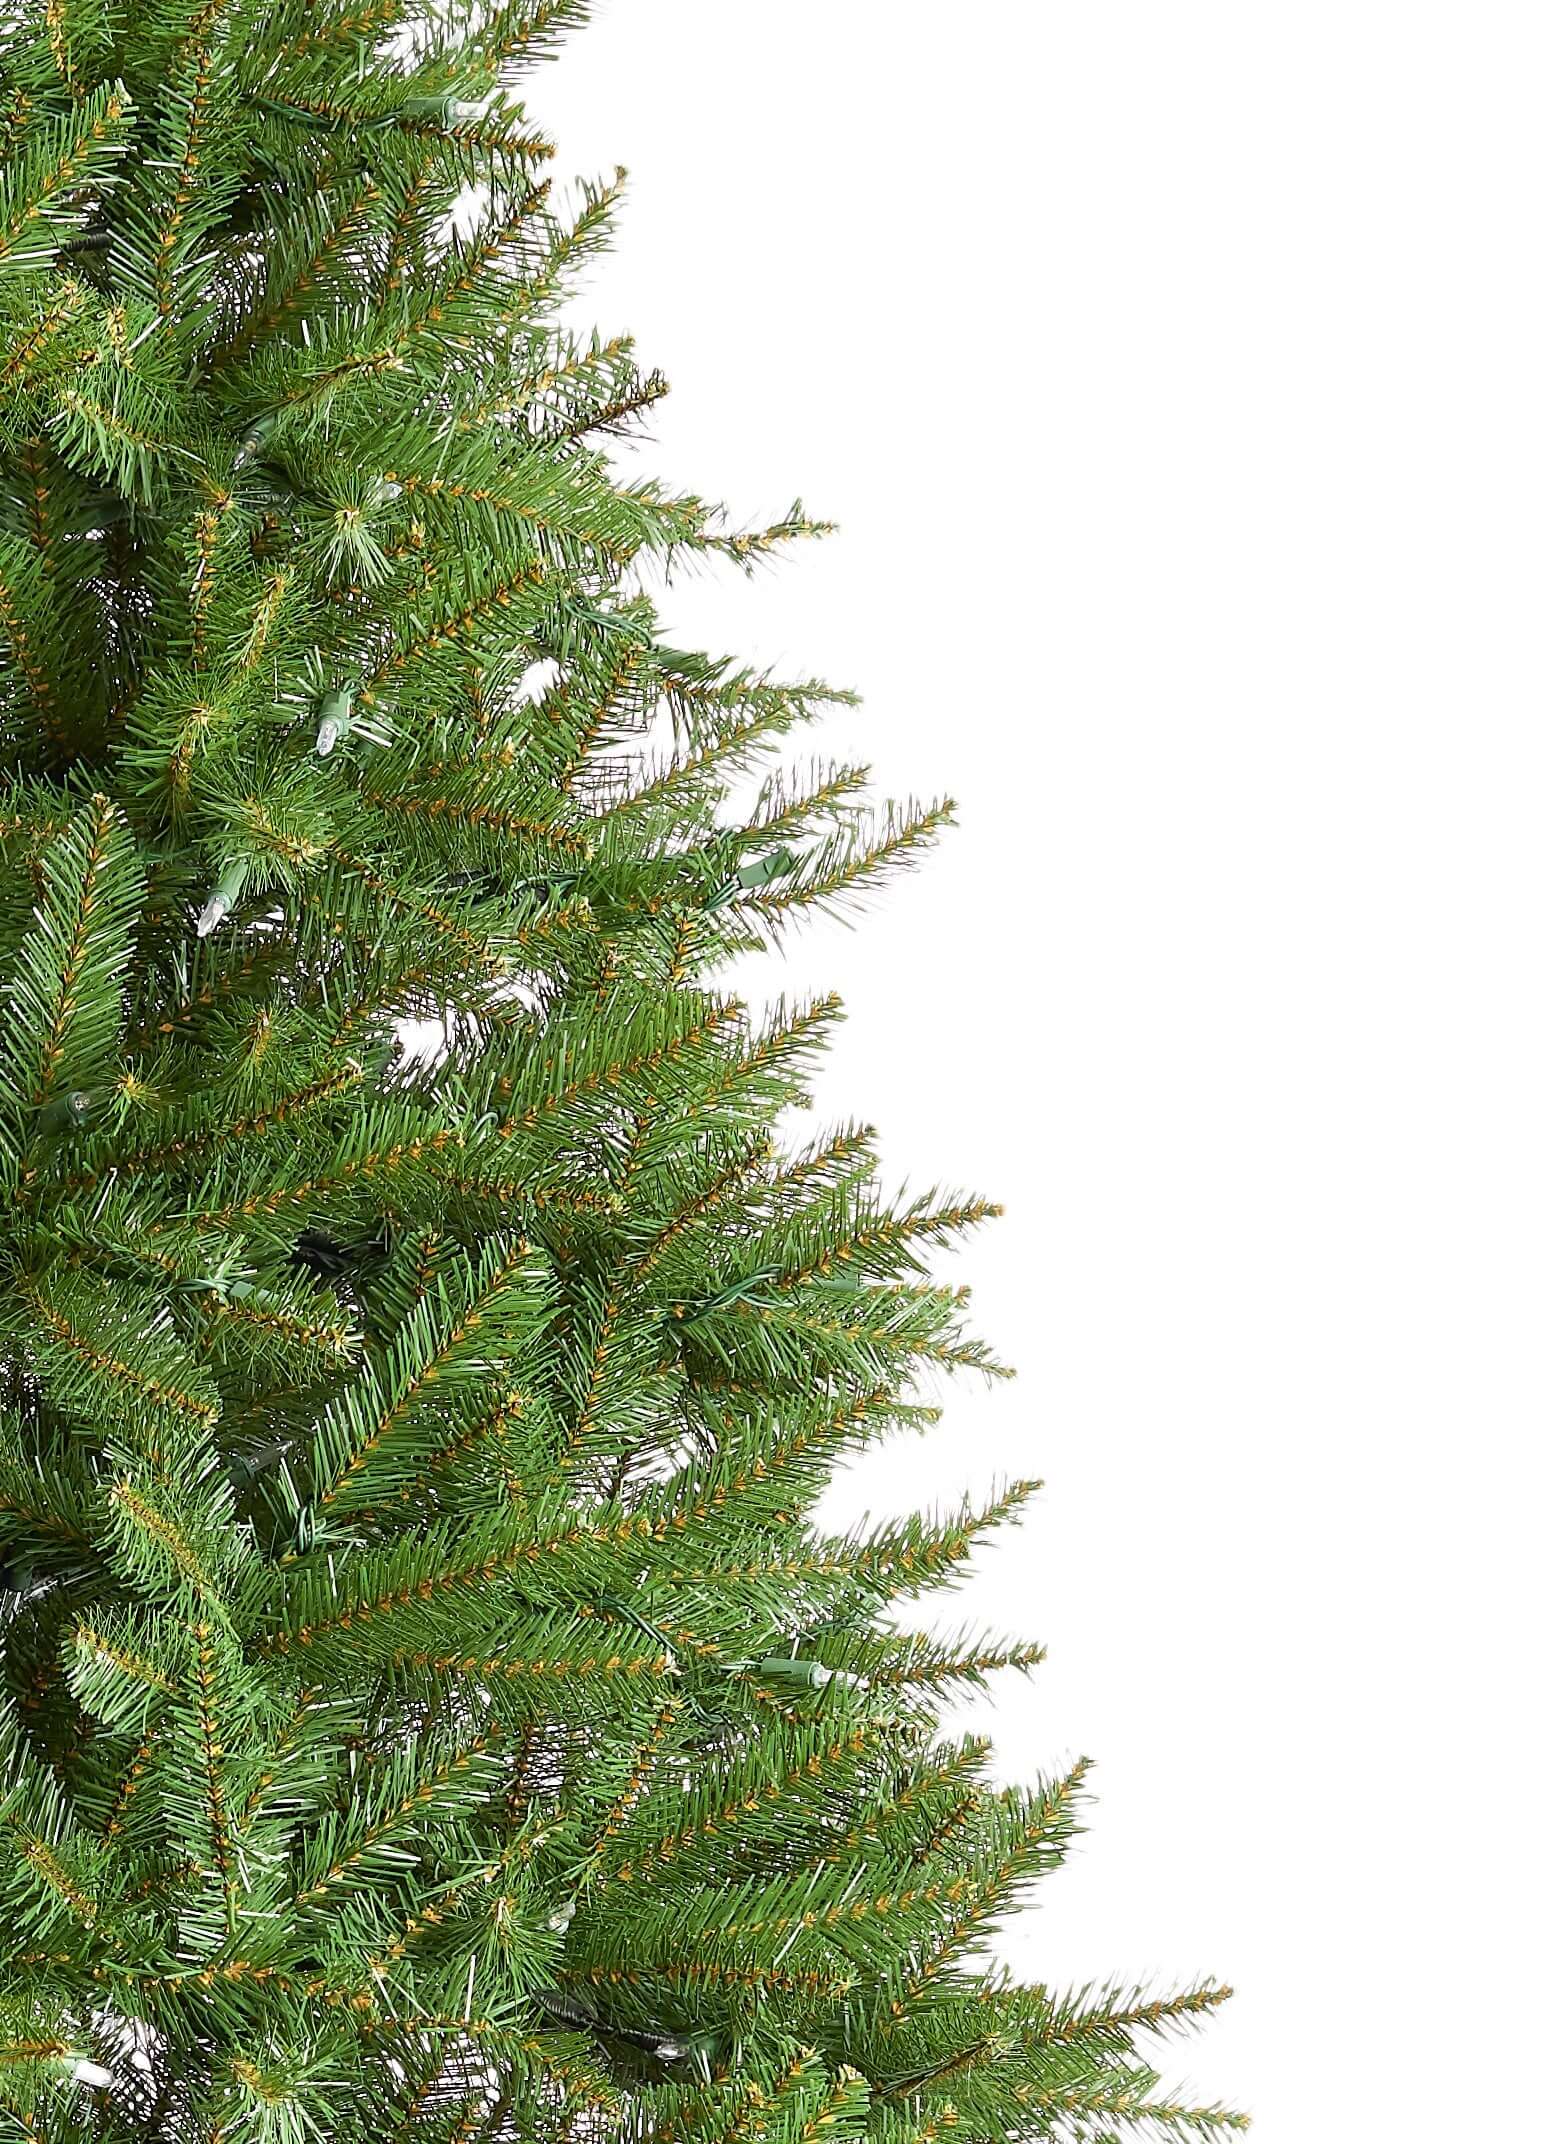 King of Christmas 9' Yorkshire Fir Artificial Christmas Tree with 850 Warm White LED Lights